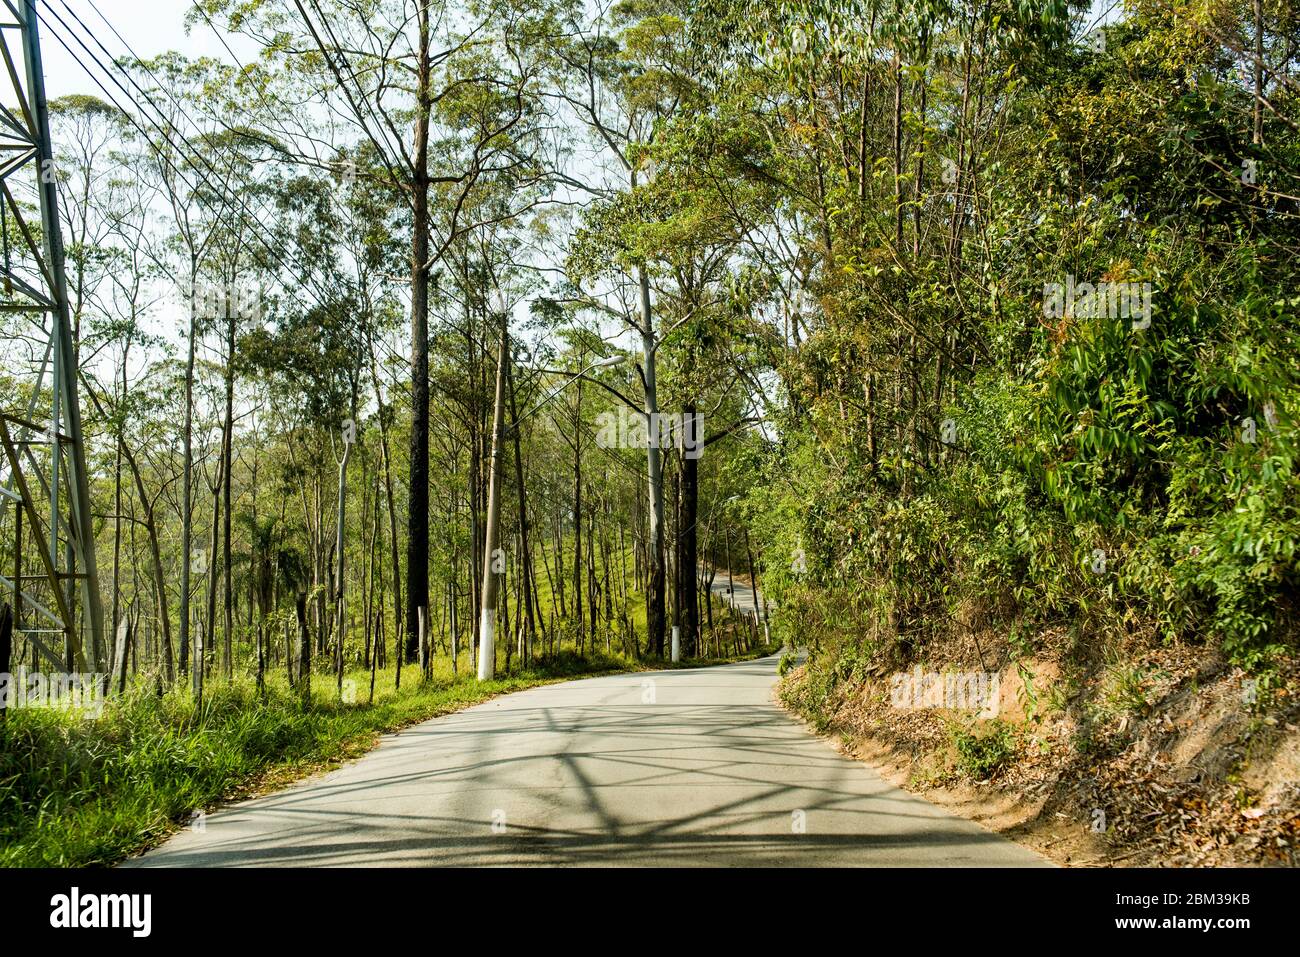 Where are you going to? A road surrounded by trees in a daylight Stock Photo